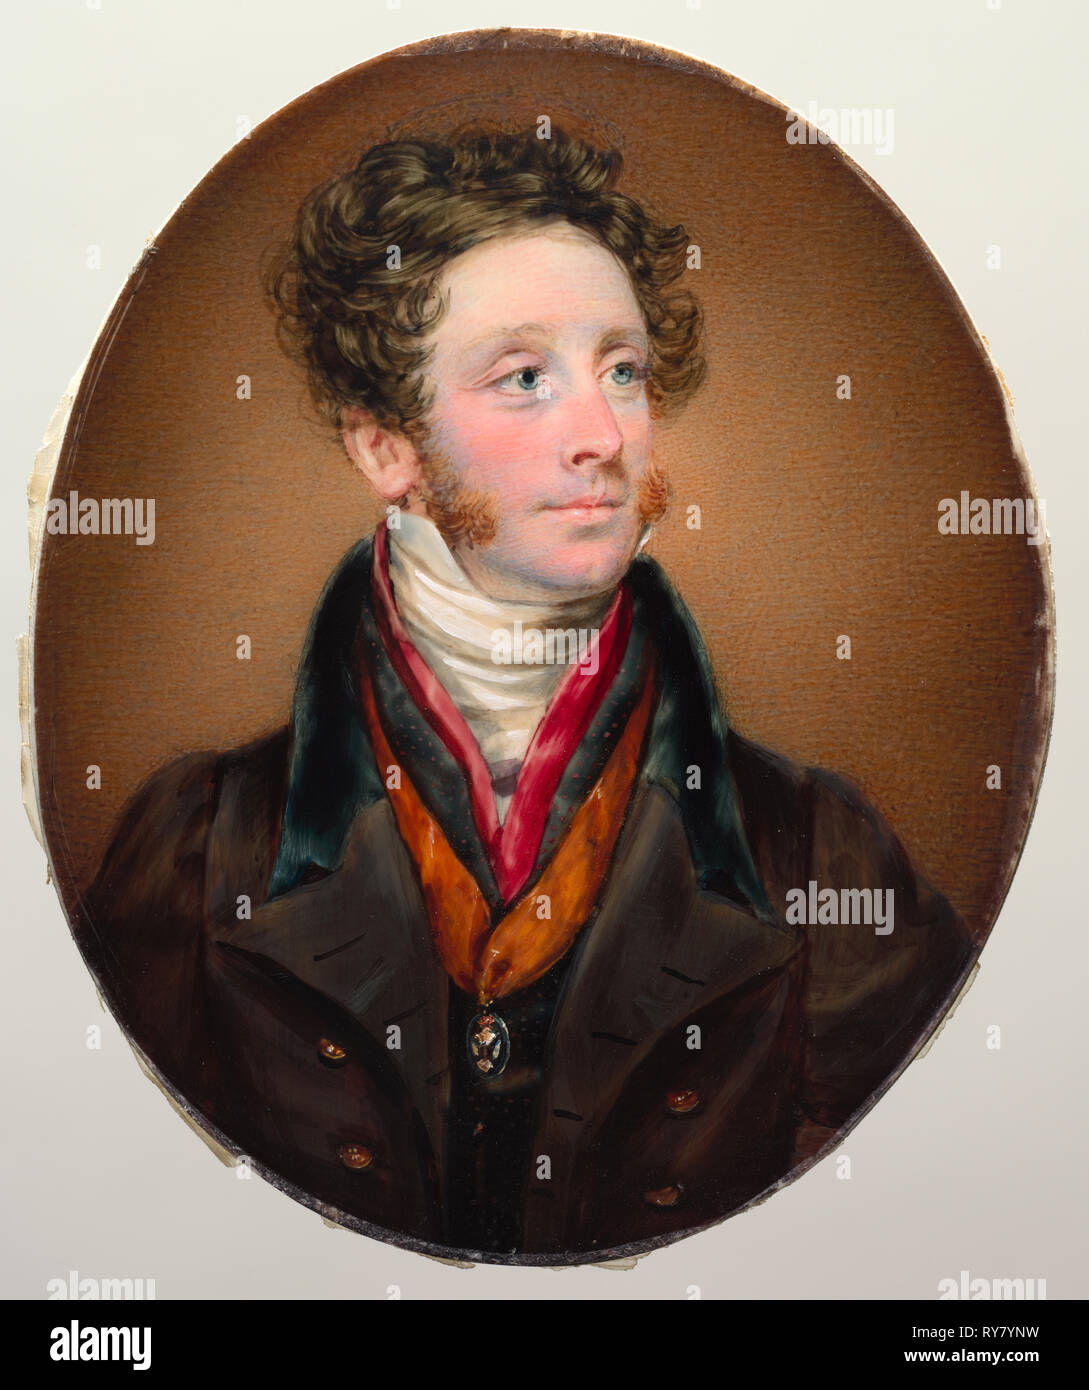 Portrait of John Francis Miller Erskine, Earl of Mar and Earl of Kellie, 1825. Kenneth Macleay (Scottish, 1802-1878). Watercolor on ivory; framed: 14.8 x 12.8 cm (5 13/16 x 5 1/16 in.); overall: 10 x 8 cm (3 15/16 x 3 1/8 in Stock Photo